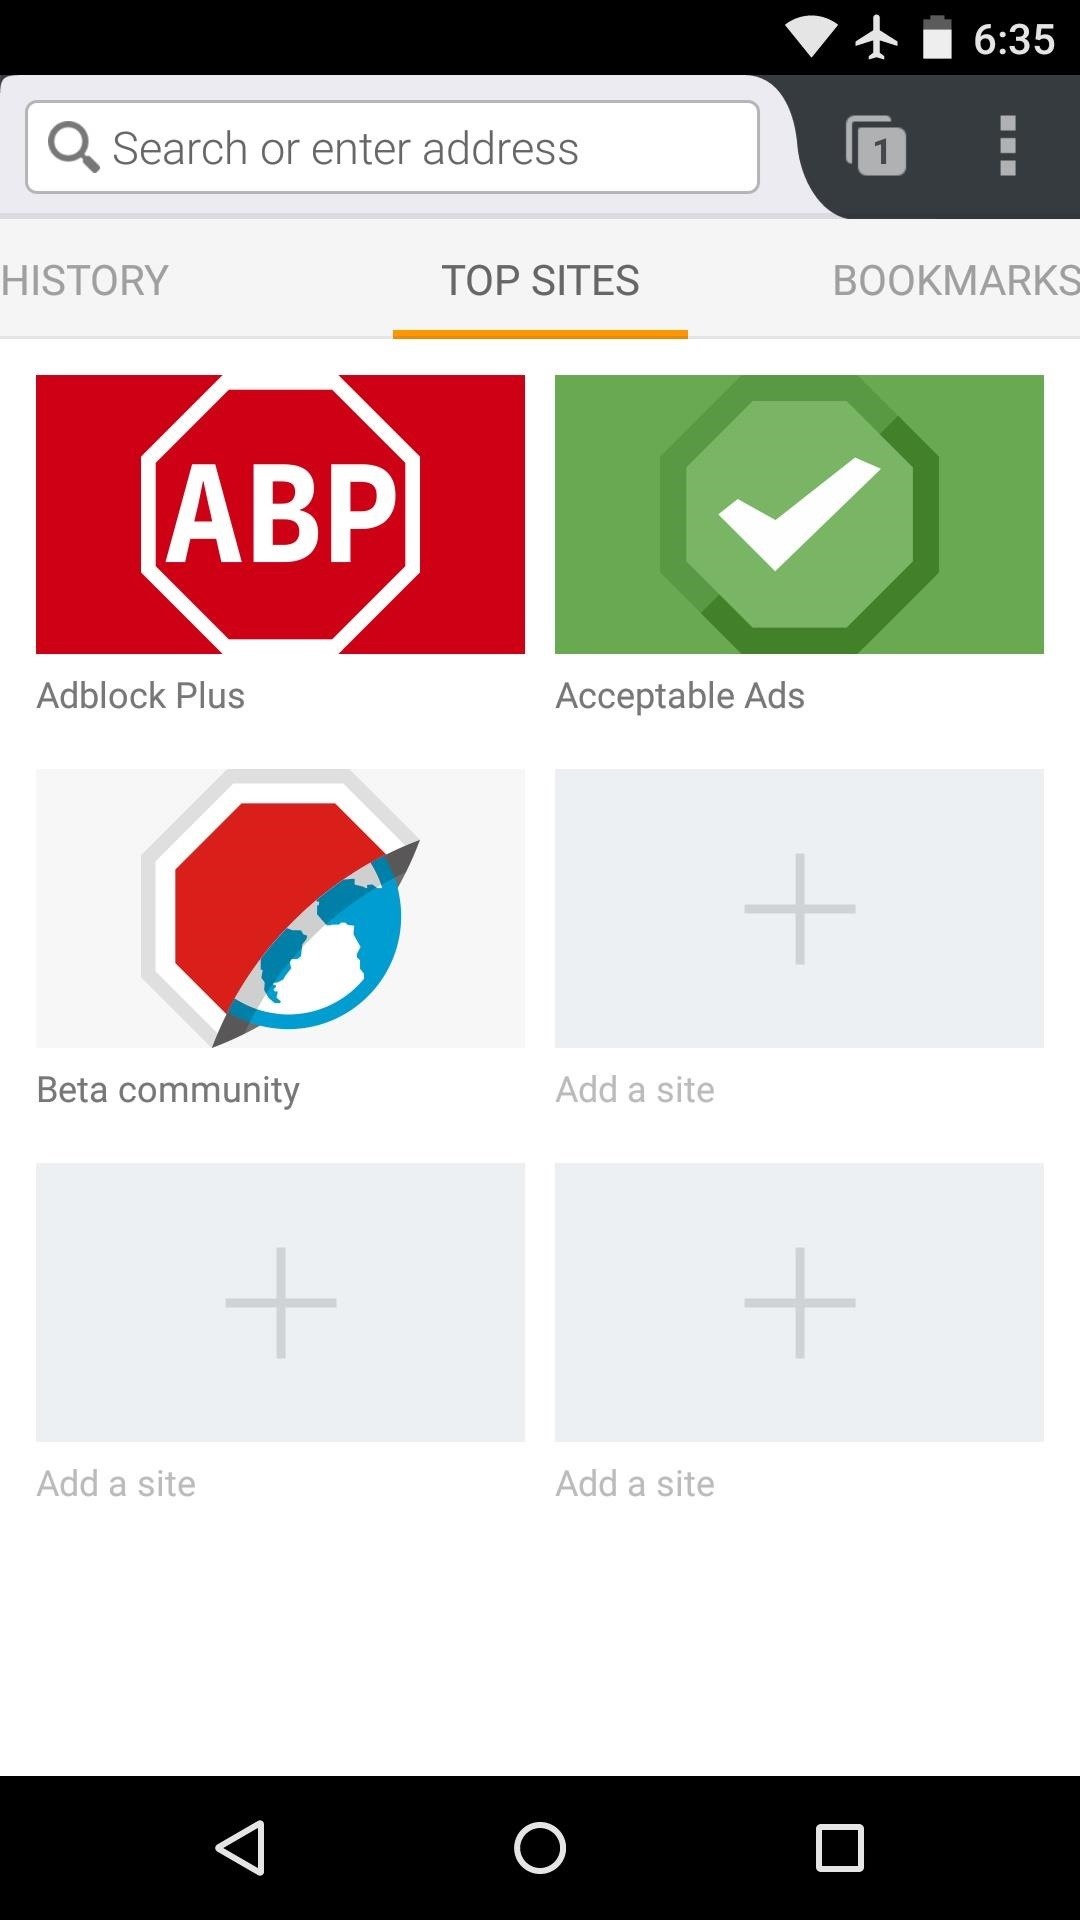 How to Block Ads in Android Web Browsers (No Root Needed)